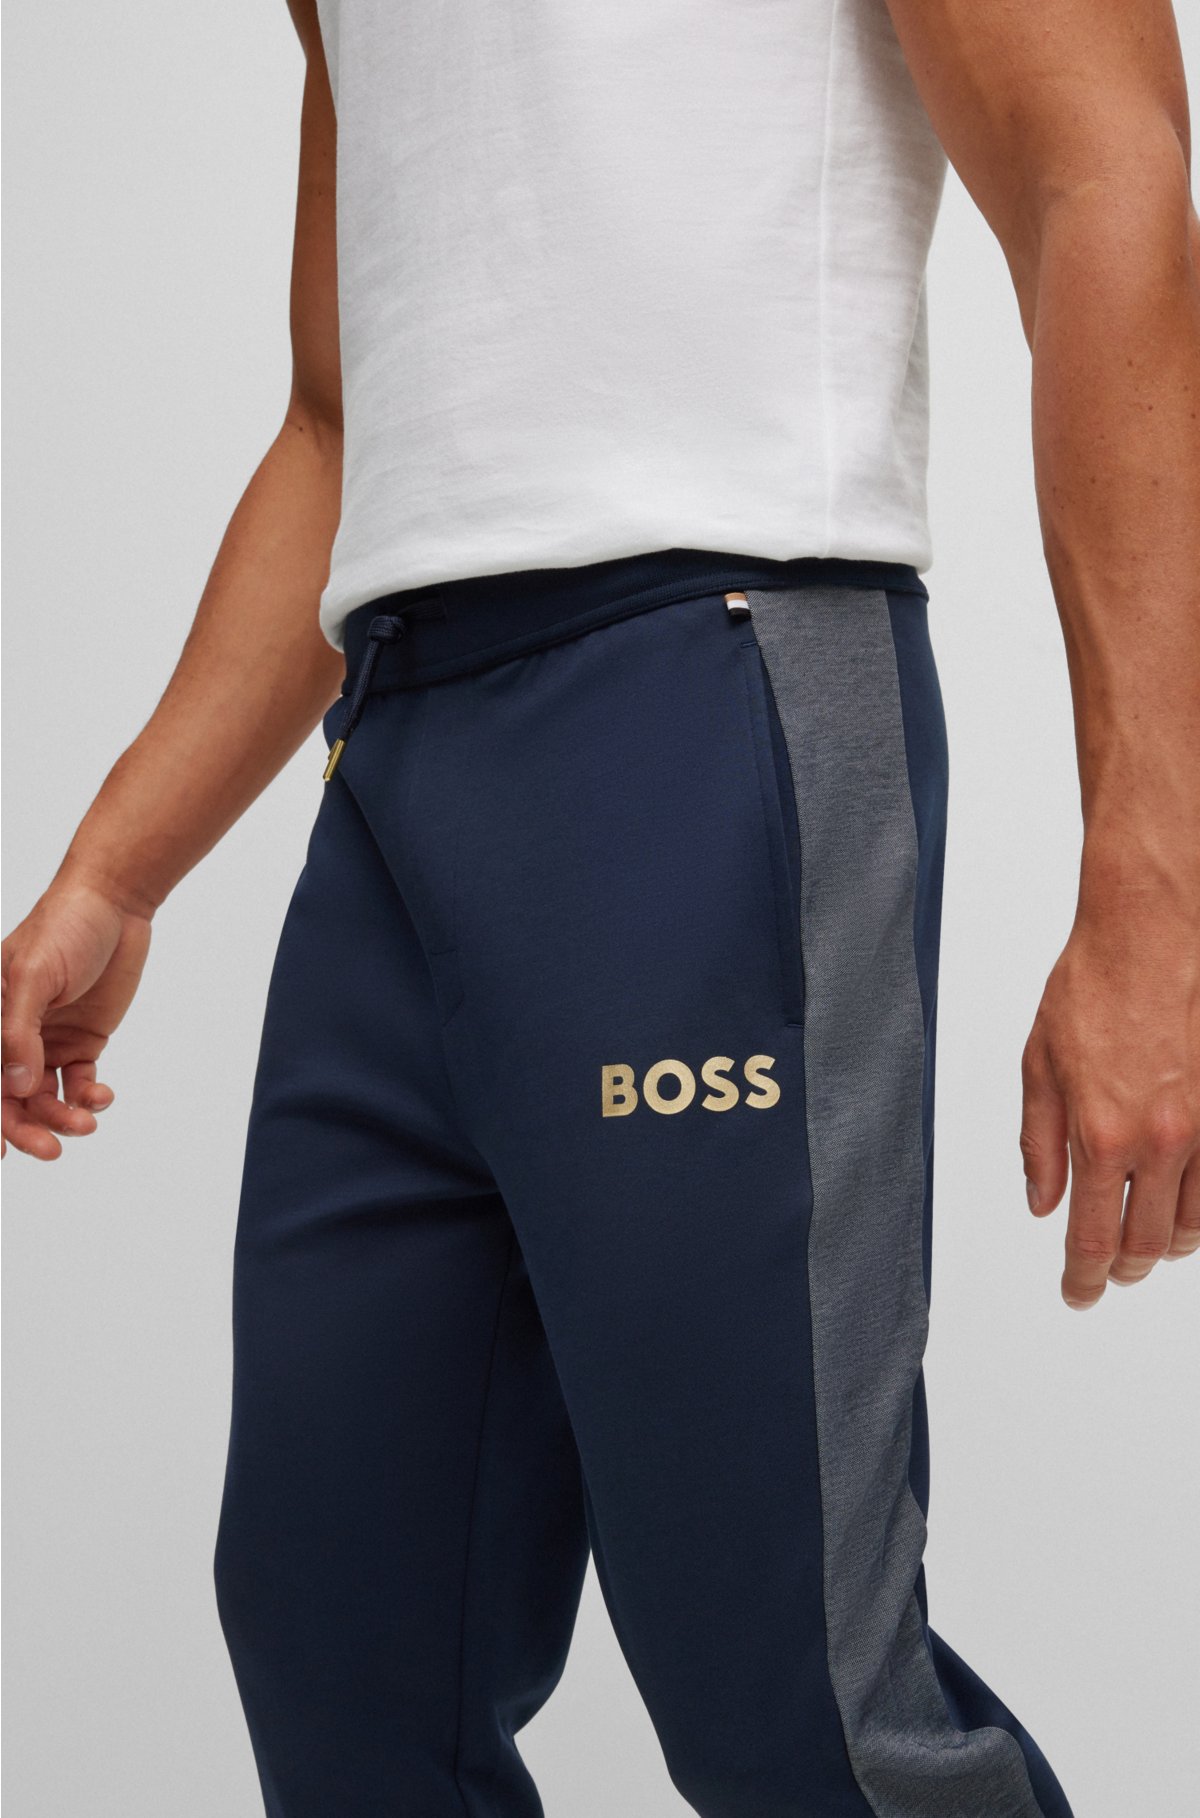 Sweatpants - BOSS embroidered logo with